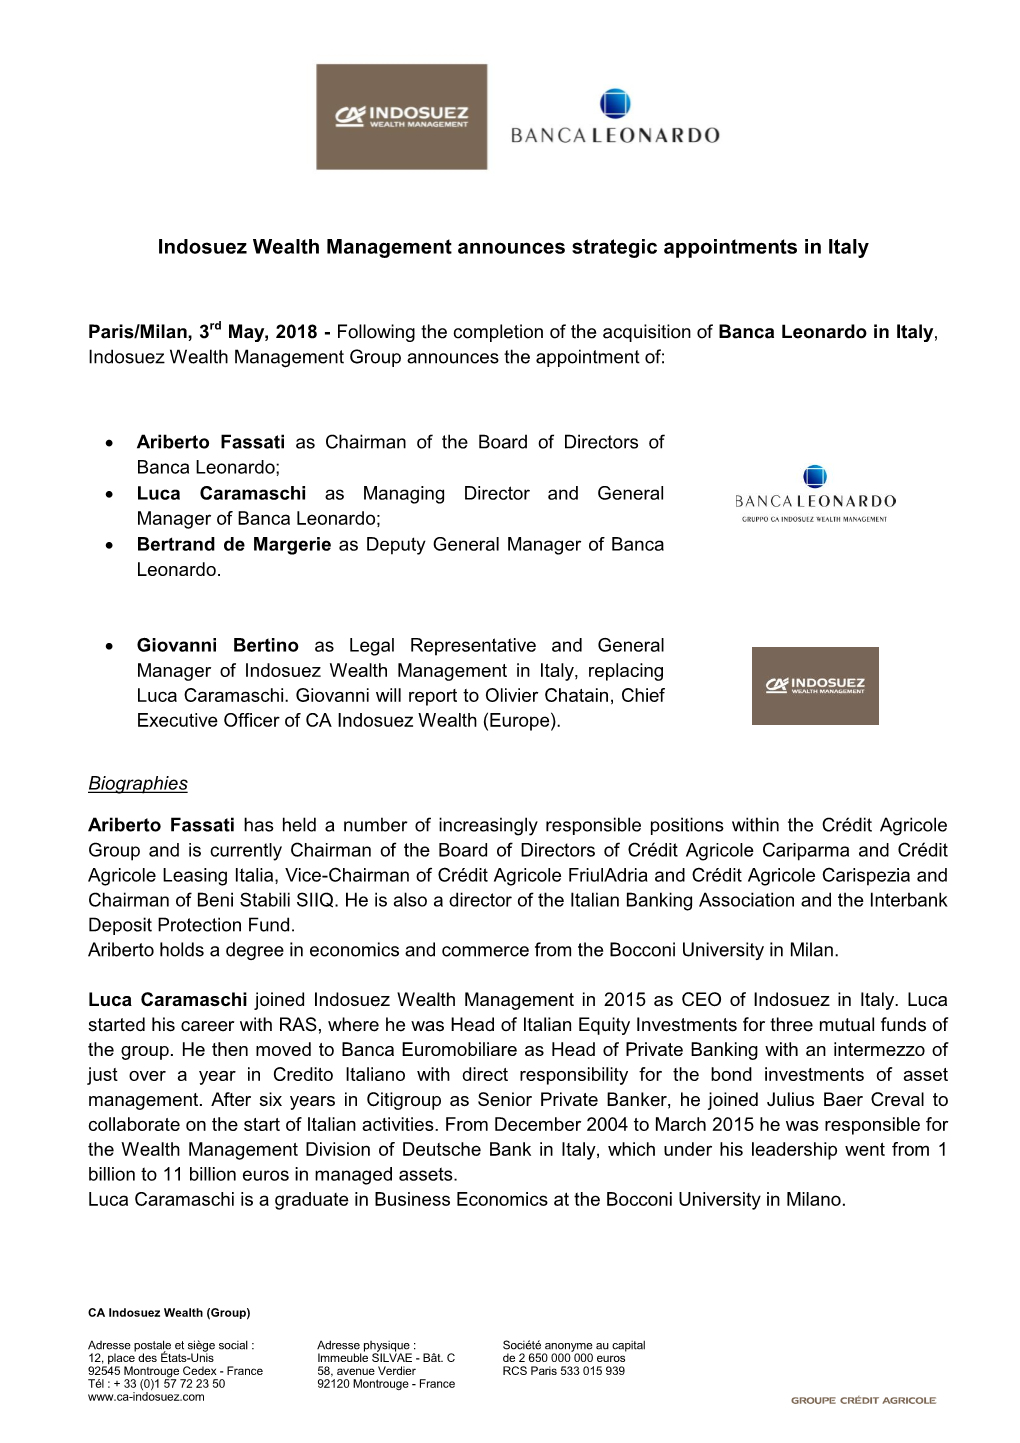 Indosuez Wealth Management Announces Strategic Appointments in Italy